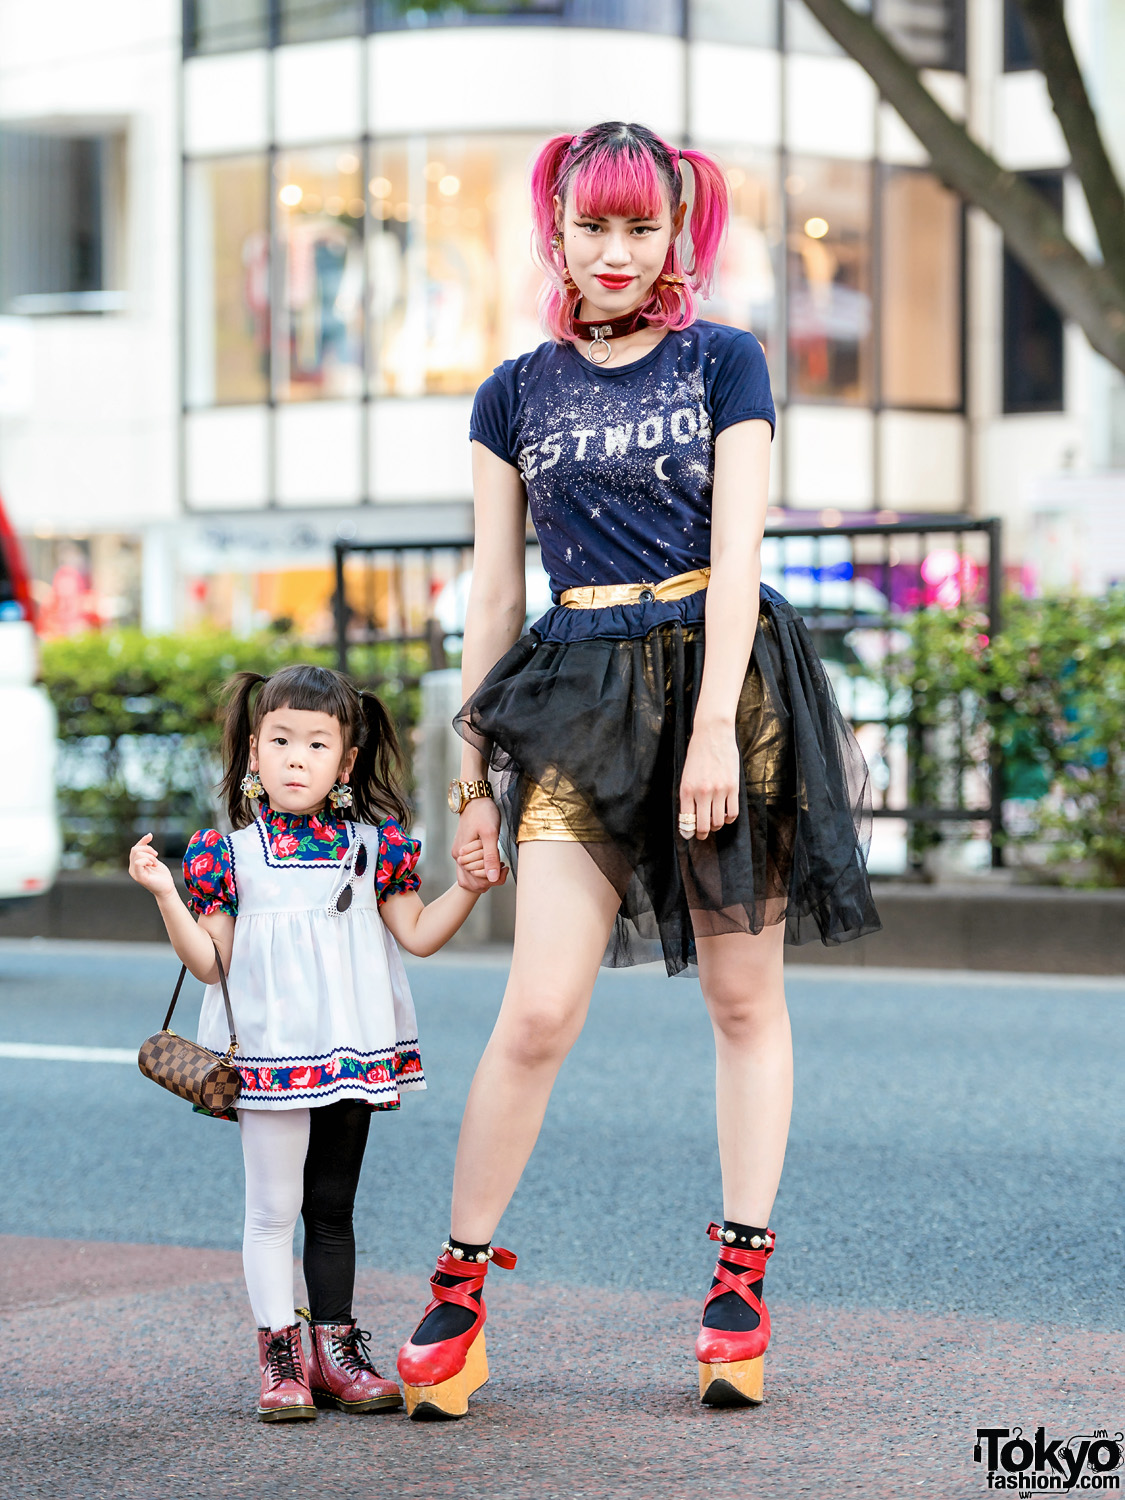 The Ivy Tokyo Mother & Daughter Street Styles w/ Vivienne Westwood, Nutty Little Room&Deco, LV & Dr. Martens